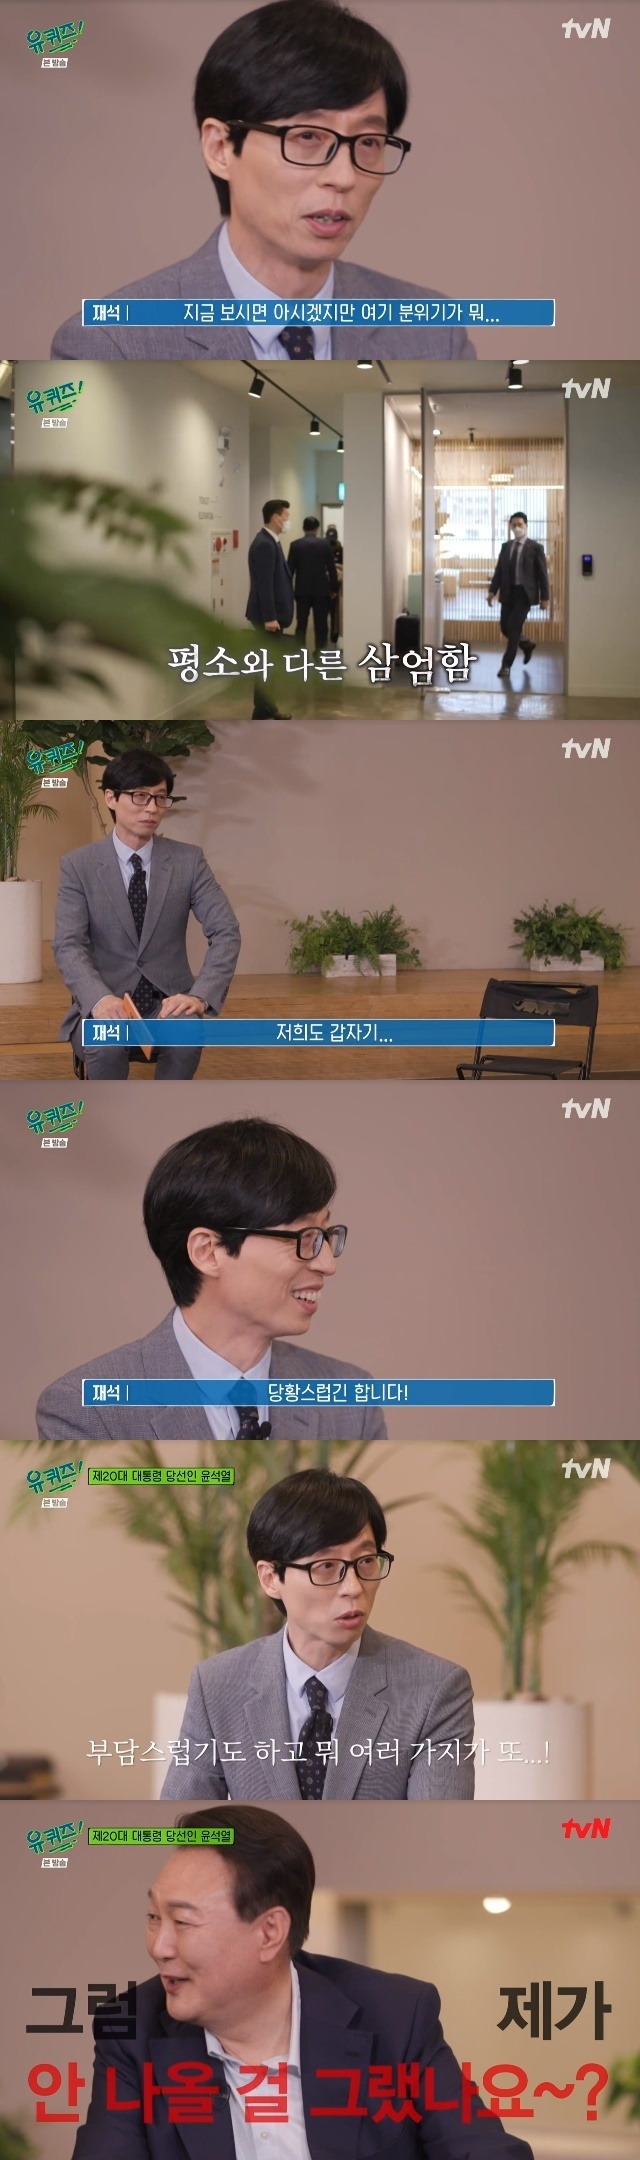 President-elect Yoon Seak-ryul has been honest since the election, and Yo Jae-Suk has attracted attention by revealing the burden on the guest.In the 150th episode of tvN You Quiz on the Block (hereinafter referred to as You Quiz on the Block), which aired on April 20, the 20th President-elect of the Yoon Seak-ryul appeared as a guest.On this day, Yoo Jae-Suk said in a different atmosphere of the recording, You can see now, the atmosphere is not normal. It is very intense.We have been very embarrassed because we have never been in the block before.Inside the actual recording studio, there were bodyguards wandering around and some buzzing.Yoon, who appeared afterwards, said that Yo Jae-Suk was saying, We were talking about whether we could talk now. Is it a glory?How did you come to appear? I should say half-half when asked Shin Ji, the will of the surrounding staff.I told them that they are a pro who people like and like a lot, and they came out to ask me to go out once. Then, I honestly say it is burdensome, said Yo Jae-Suks Toro, I did not think I would come out.Yoo Jae-Suk asked Yoons Haru routine: Normally, starting at 6 a.m., texts come in.The phone is at dawn, there is an article, and I am starting Haru. Yesterday I slept at about 3 am.Yoon said, There are times when it is late to report your data.Asked if he would eat late-night meals, he said, I eat fruit for late-night snacks, but yesterday I ate four meals.I ate early in the morning, I was in Daegu yesterday, but I ate Kalguksu for lunch at the preface market, went to Dongseongro, and I went to the restaurant. I ate noodles and kimbap because it seemed delicious.I like noodles. I like noodles. I dont get tired of eating three-shit noodles.Yoon also answered the question of whether he ate mincho (mint chocolate ice cream) after the presidential election, saying, I ate it many times. He said, I dont know if it was against the election.Its because of the anti-mincho wave, she quivered numbly.After that, Yoon said that he had nine judicial tests, and that there was no one who did not know him at the time in Shinlim-dong.When asked, I liked to tell you the problem, but I fell a lot on the test. Yoon said, When I studied with me strangely, the test was good.The reason for passing the ninth was Friends wedding, I saw the judicial examination for four days. Friend asked me to let him go on Saturday.Im going to the test next week. He said he would. And he was sitting in the library, but he couldnt study.I thought it would be better to see the book in the car, so I drove late at the Gangnam Express Terminal.I didnt have anything to read. I took out the book I took, and I didnt want to read it.I read the part that never comes to the test after the first time in common sense because I did not have anything to read funny. Its the first time in the history of the judicial examinations, and I remember that. I wouldnt have seen it if it wasnt for Friends wedding.(The problem) is that there is a song in the classroom, but I was glad to hear it this year. When asked if his dream was originally a test, Yoon said, I did not even know what the test was.So the future was a minister, and my father was in school, so I was a little bit too big for Professor Souveton to hope for the future.I tried to open a lawyer in the judicial training, but I thought it would be better for the Friends to live in public for a short period of time.I was late, I took one step out, went back in. I could not imagine that I would be in the prosecution for a long time. Then, when asked if the prosecutors job that he got was right, he said, I did not know if it was right, and I went to work for a lot of work.I started it, so I should do it. I have not been able to eat breakfast since dawn and have lived for years. He also served as the general secretary of the rice office during the inspection, and he also remembered that the manager had drunk, checked and carefully planned the menu.Yoon, who was elected to the 20th presidential election and now walked another way, said, I slept well in the election.I have to give people a satisfactory result, but I have to worry about what to do, get advice. I have a great responsibility.I think the position of president is a lonely position, Toro said.Then he said, Theres a sign that President Truman once wrote on his desk. All responsibility ends here. Responsibility belongs to me.I have to consult with many people, but ultimately when I decide, I have to take all responsibility, expect one body, and criticize one body.I have to work hard and get a responsibility evaluation according to it. On the other hand, Yoon s appearance in Yu Quiz is the first entertainment appearance since the election of the president.Yoons broadcast recording news was announced earlier, and thousands of articles containing various opinions of viewers were posted on the viewers bulletin board.Yoo Jae-Suk has also received a number of criticisms along with the program.